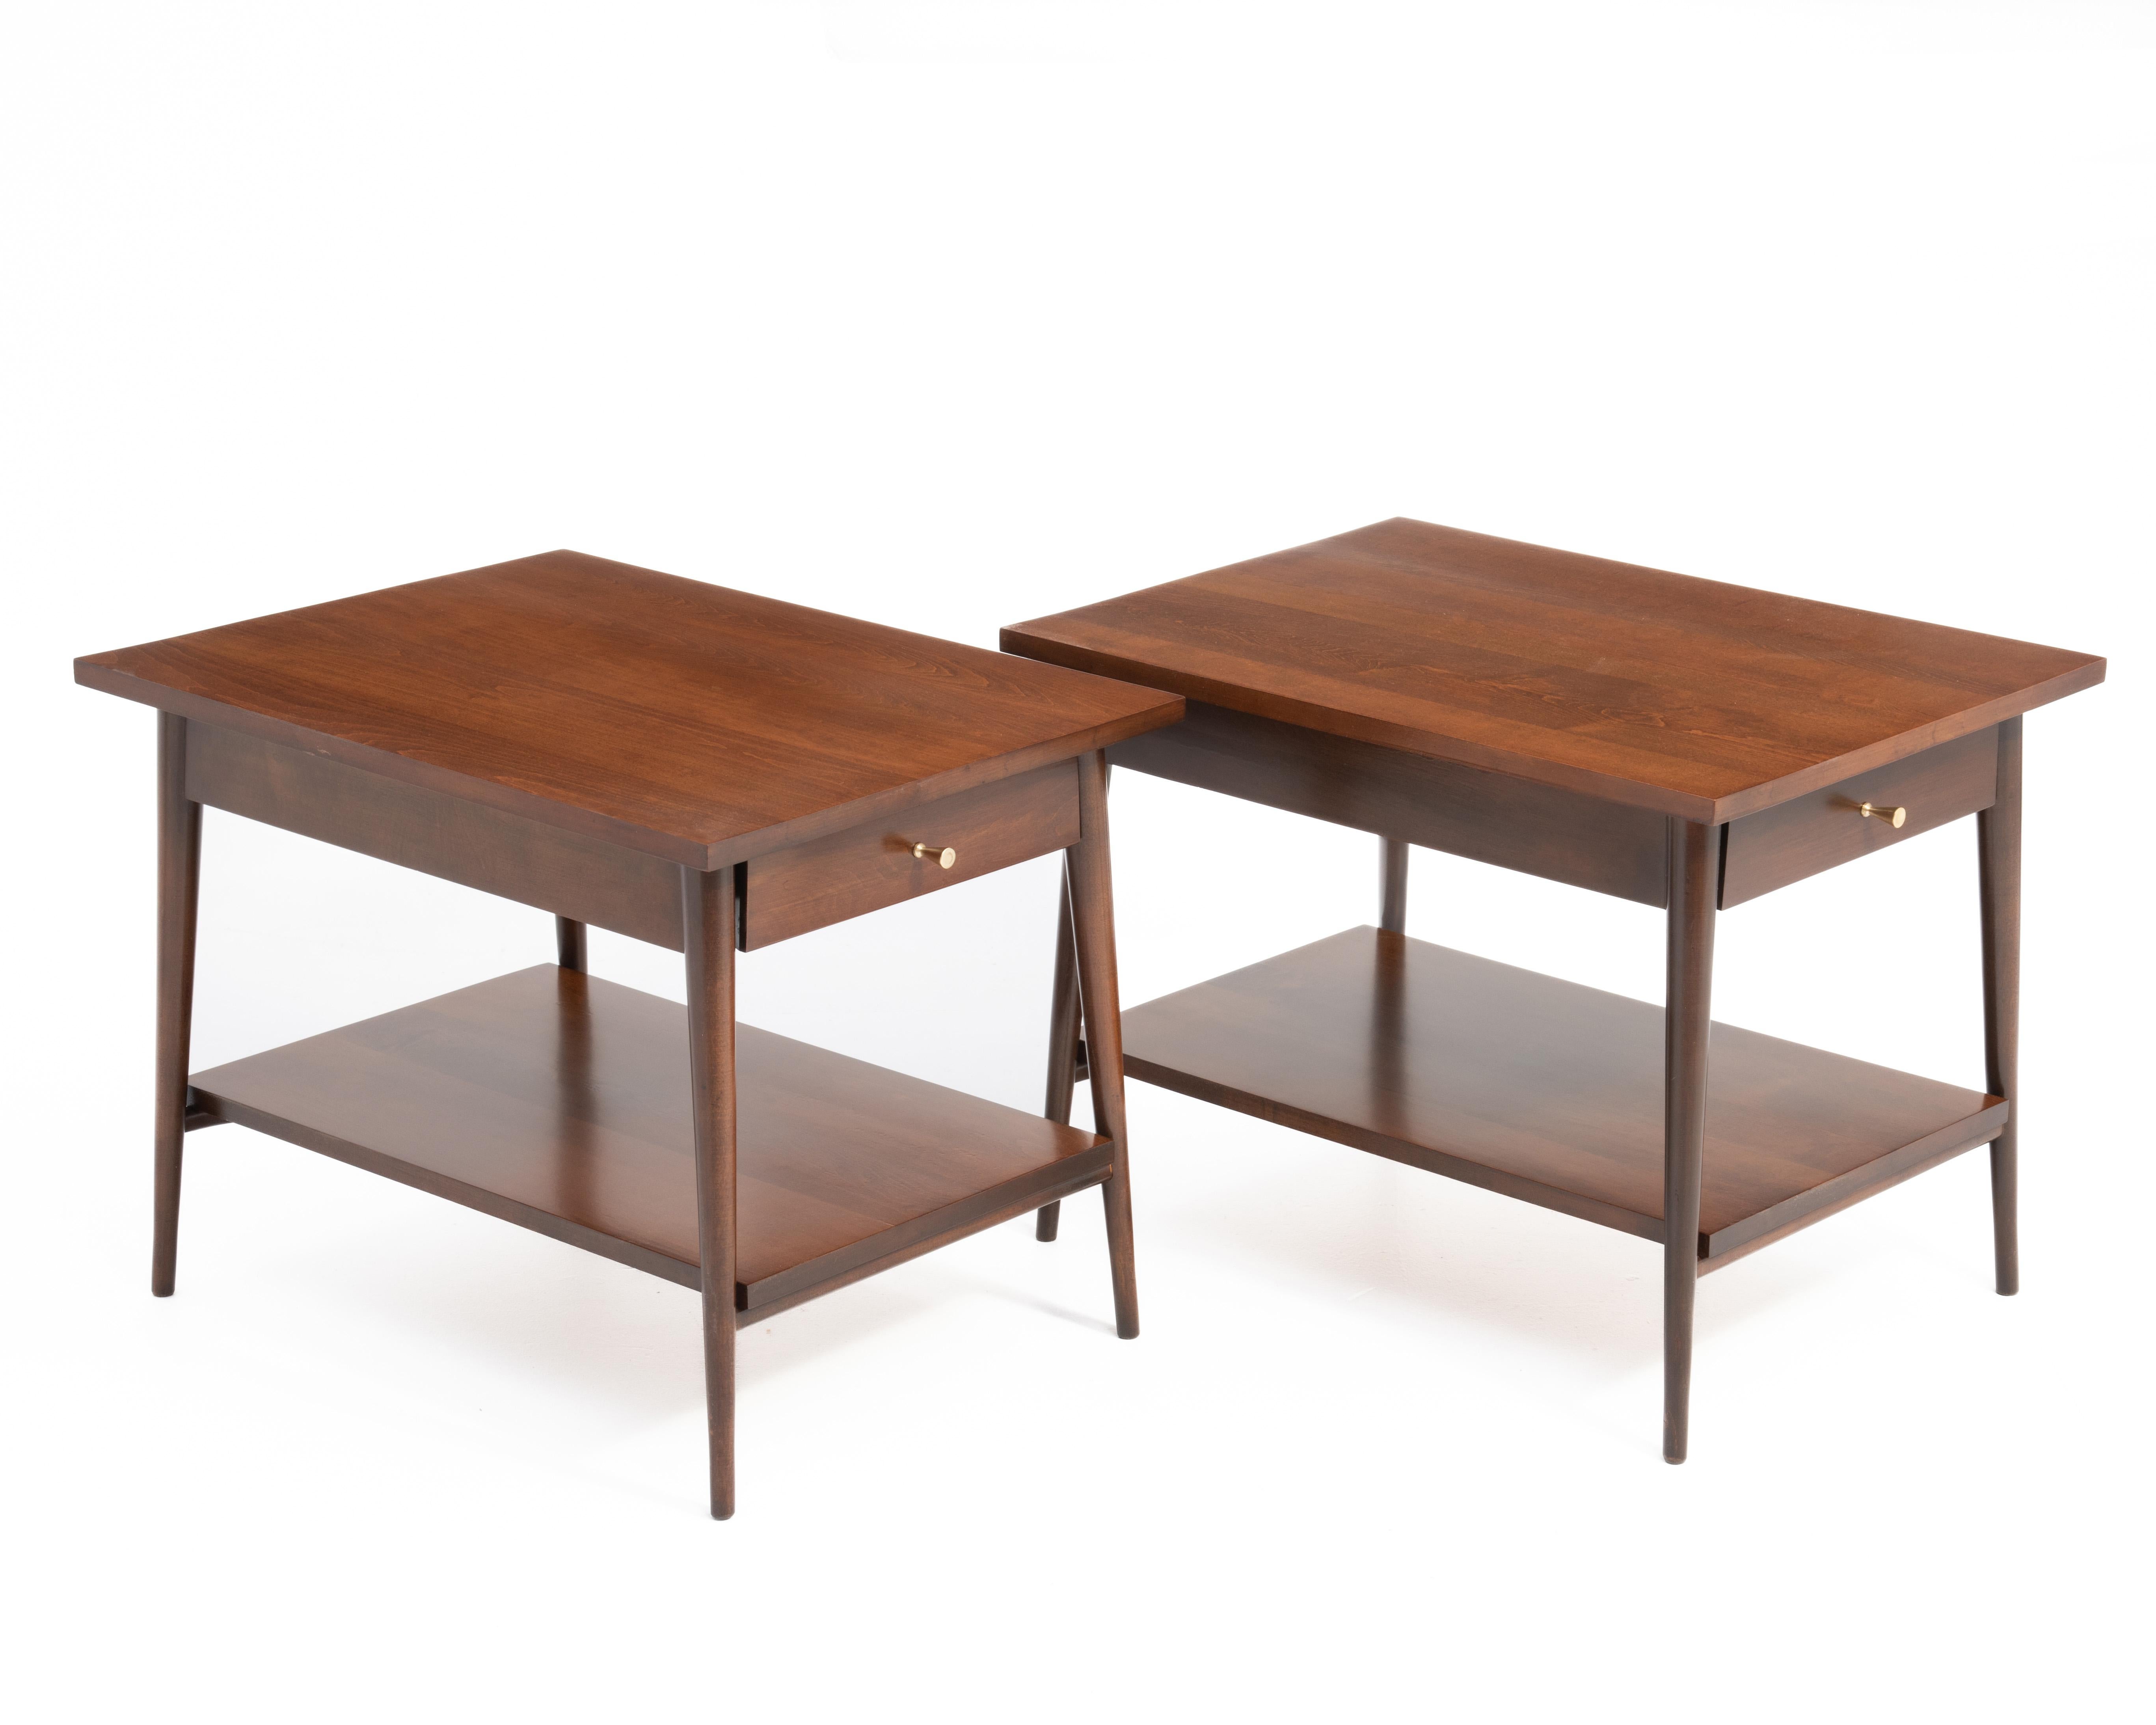 A pair of Paul McCobb Planner Group for Winchendon furniture side tables. Restored in the original brown color with original hardware. Fully marked.